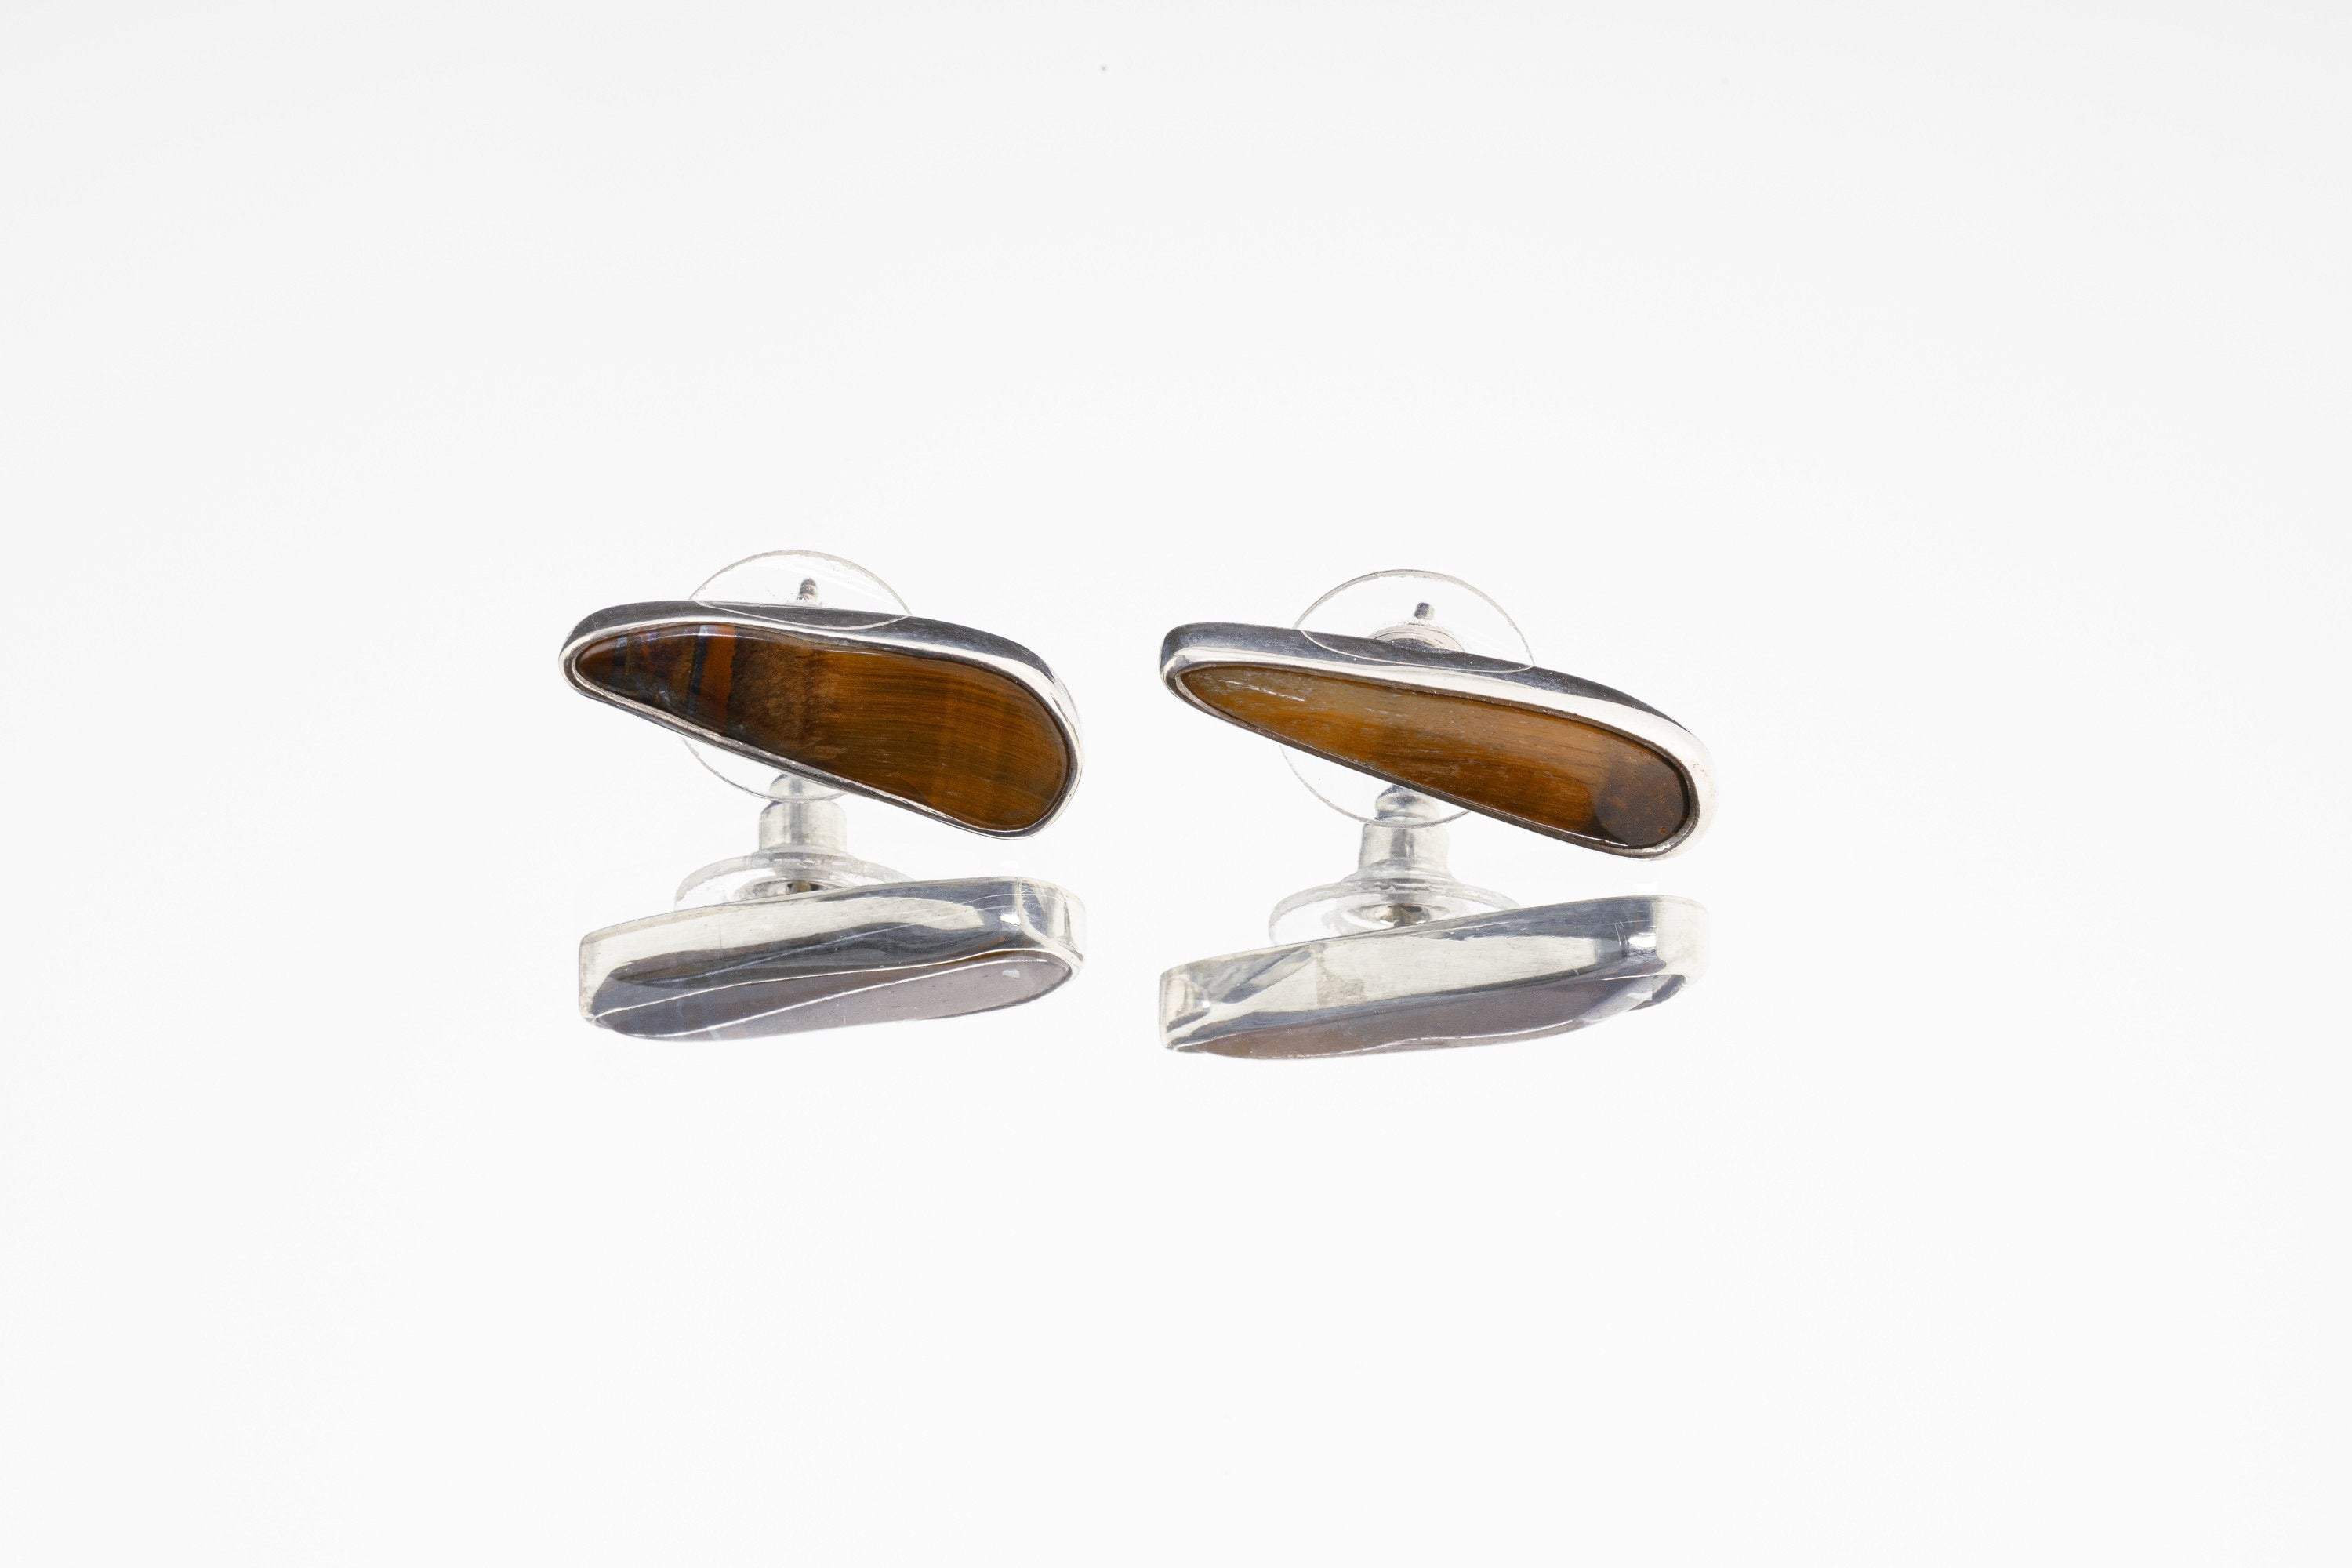 Tigers Eye Stud - organic shaped Pair- Sterling Silver - Polished Finish - Freeform Earring Studs